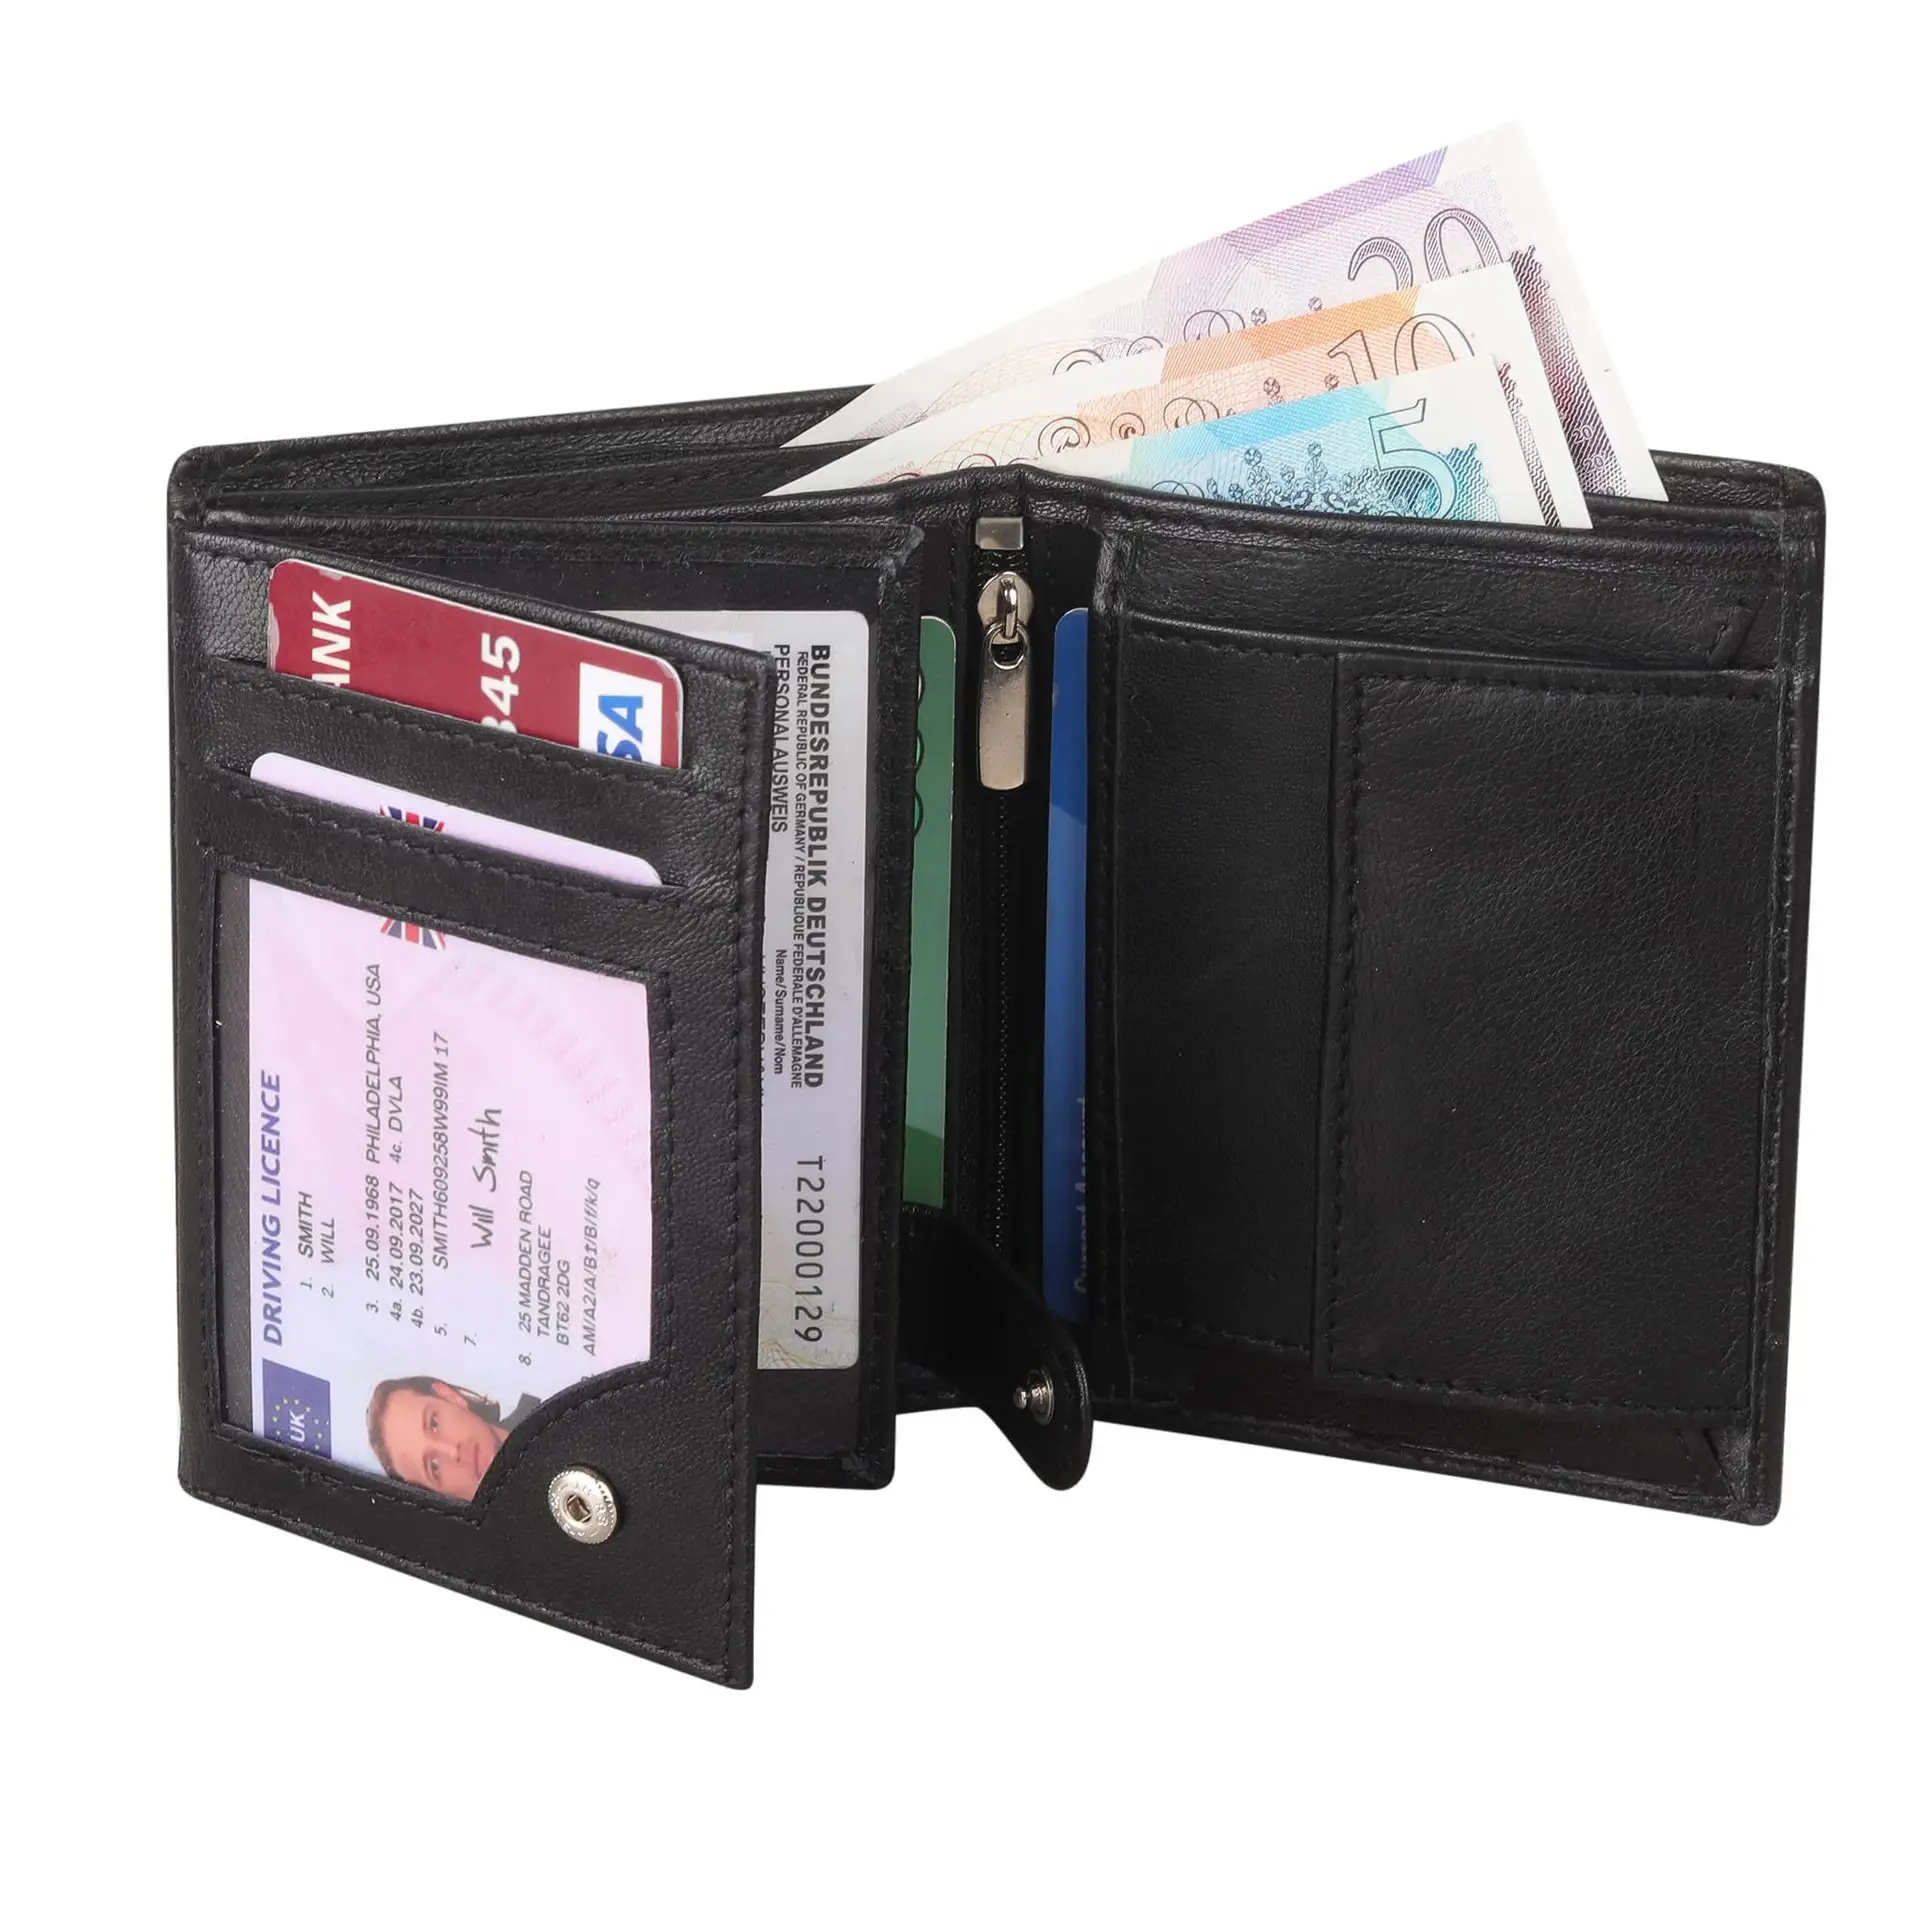 cash compartments men's wallets with zipper coin pockets custom logo lots of card slots and 2 id card windom wallet